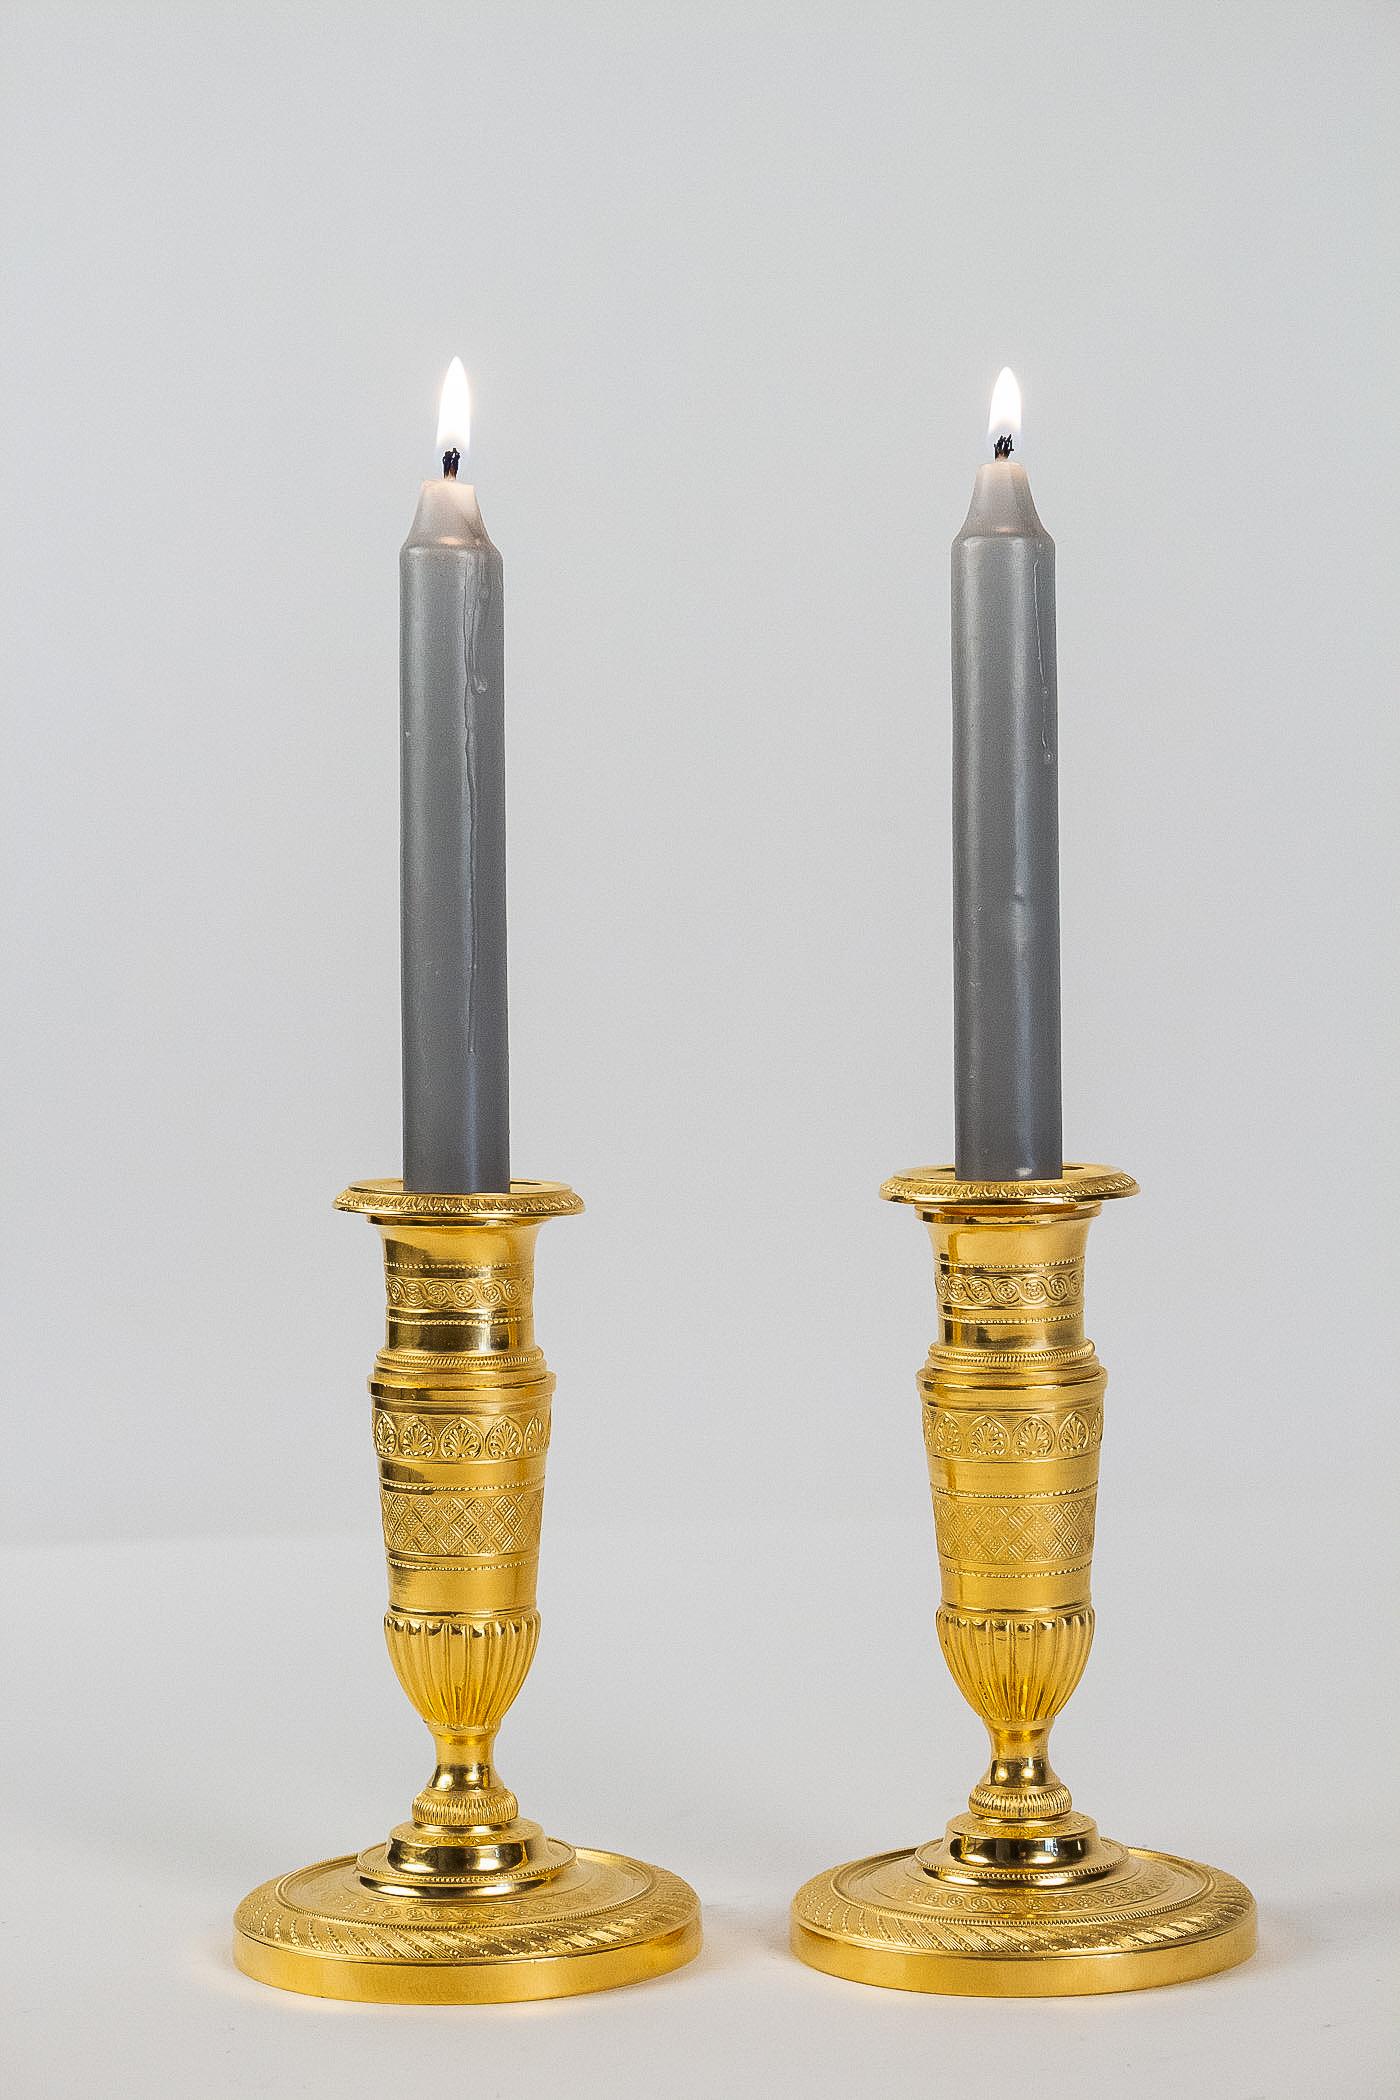 French Empire period, pair of small gilt bronze candlesticks, circa 1805.

A rare and elegant pair of small gilt bronze candlesticks, called “Ragots.”. Our candlesticks present a beautiful work of Fine shears, palmettes, interlacing, and geometric